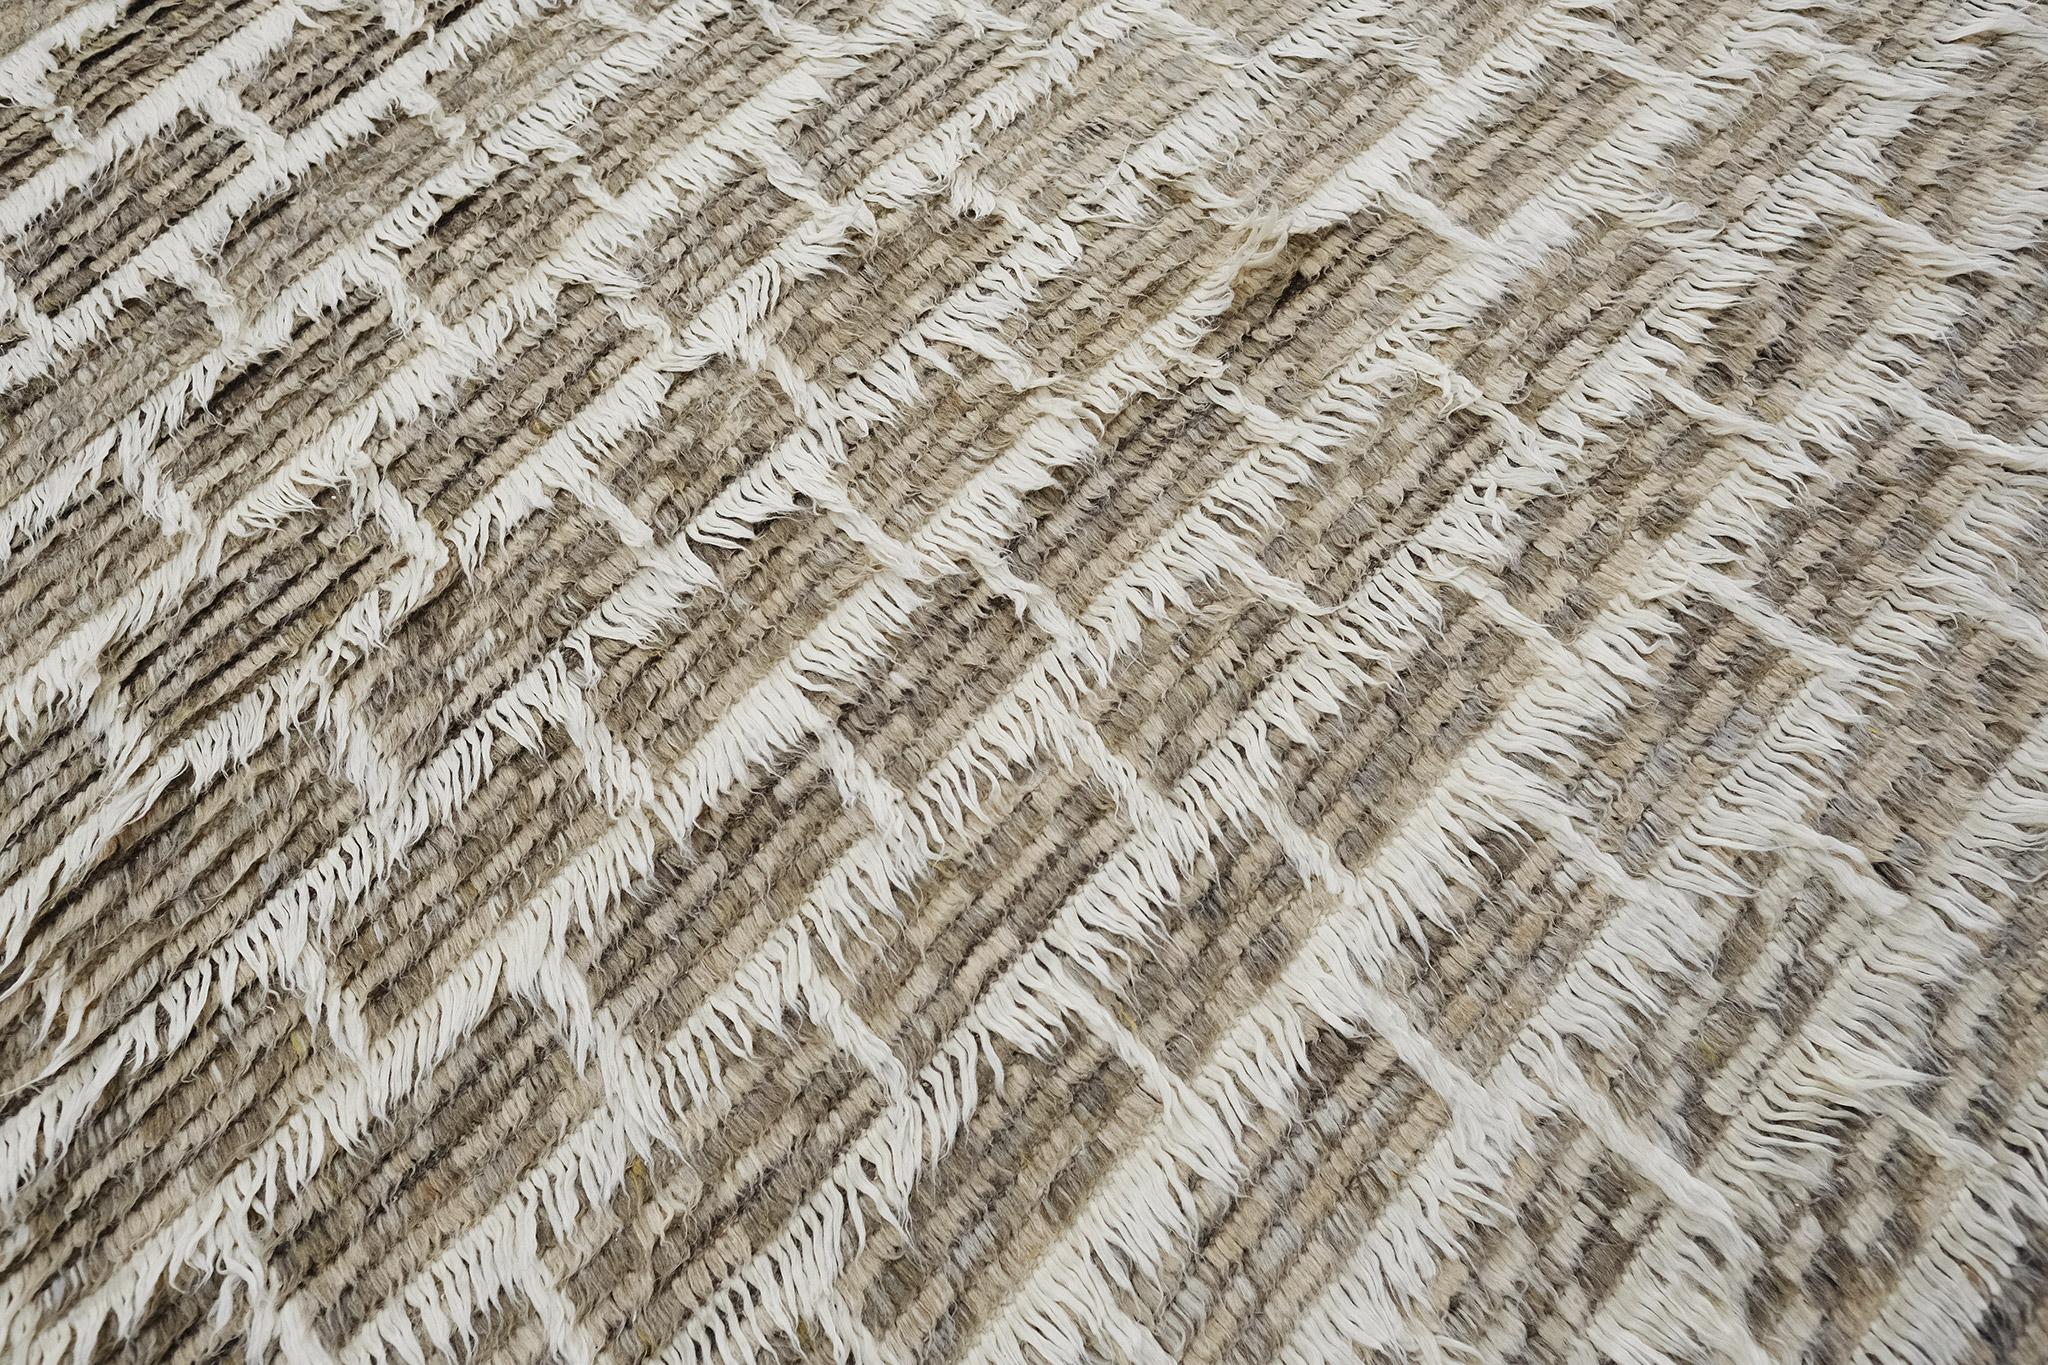 In the Ahina rug, a rectangular grid frames a field of dappled pile tones. This piece combines ivory lines with heathered clay and taupe tones. 

Hand knotted of hand-spun wool, the Sahara Collection melds linear organization with a relaxed